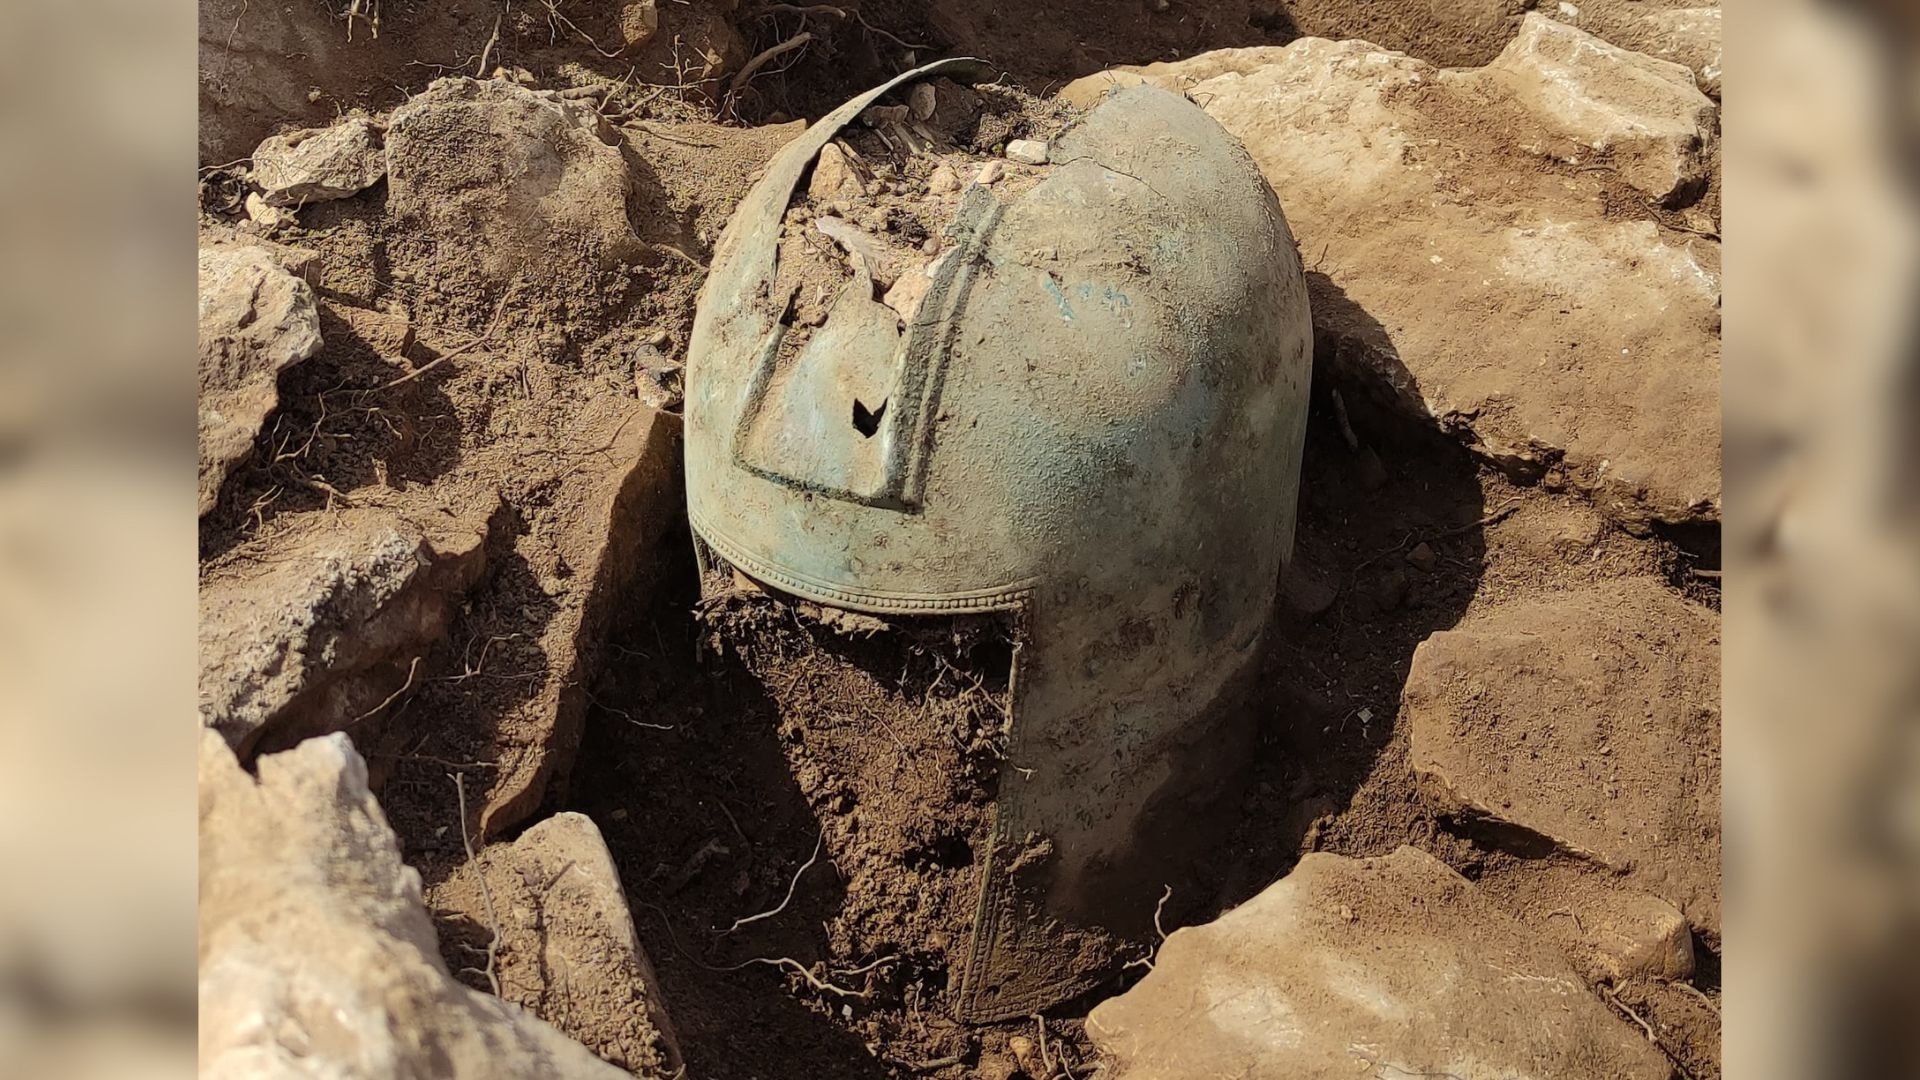 2,500-year-old Illyrian helmet found in burial mound likely caused 'awe in the enemy'